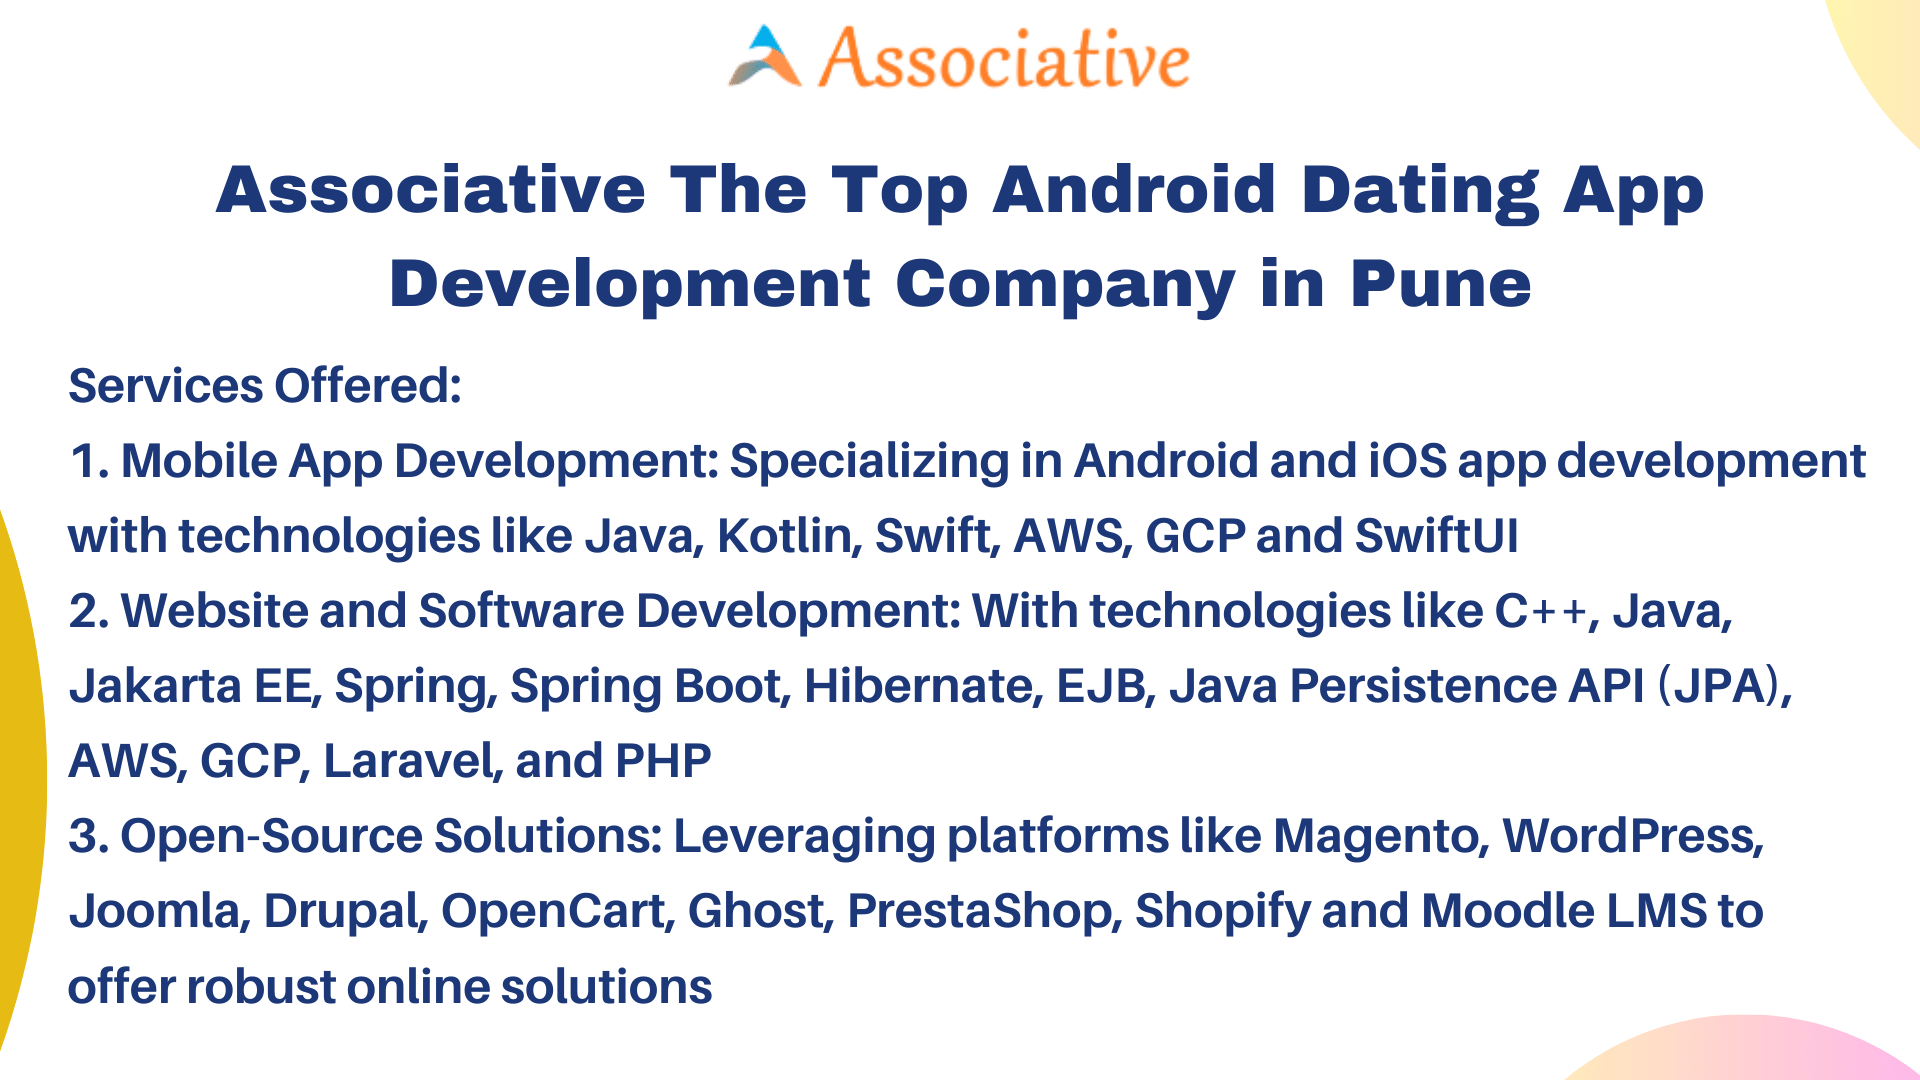 Associative The Top Android Dating App Development Company in Pune